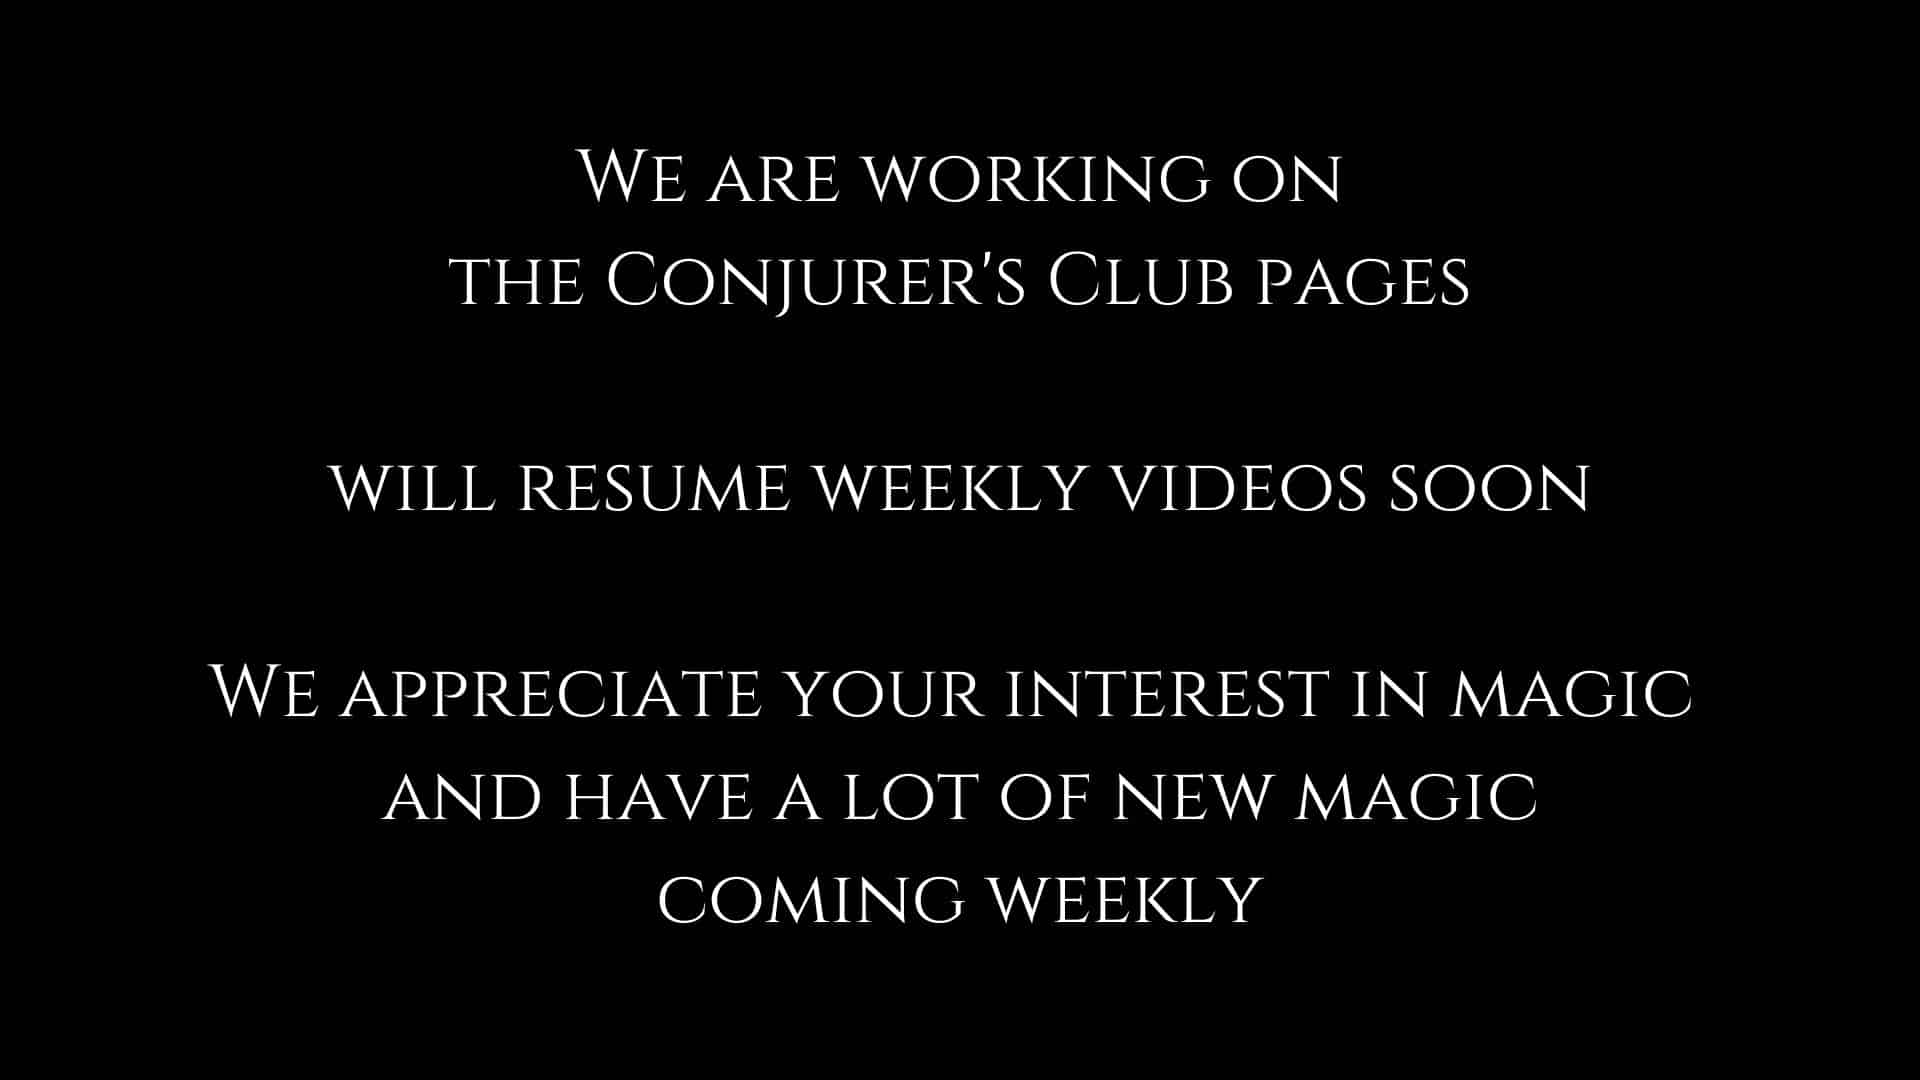 we are working on the conjurer's club pages and will resume weekly videos soon we appreciate your interest in magic and have a lot of new magic coming weekly